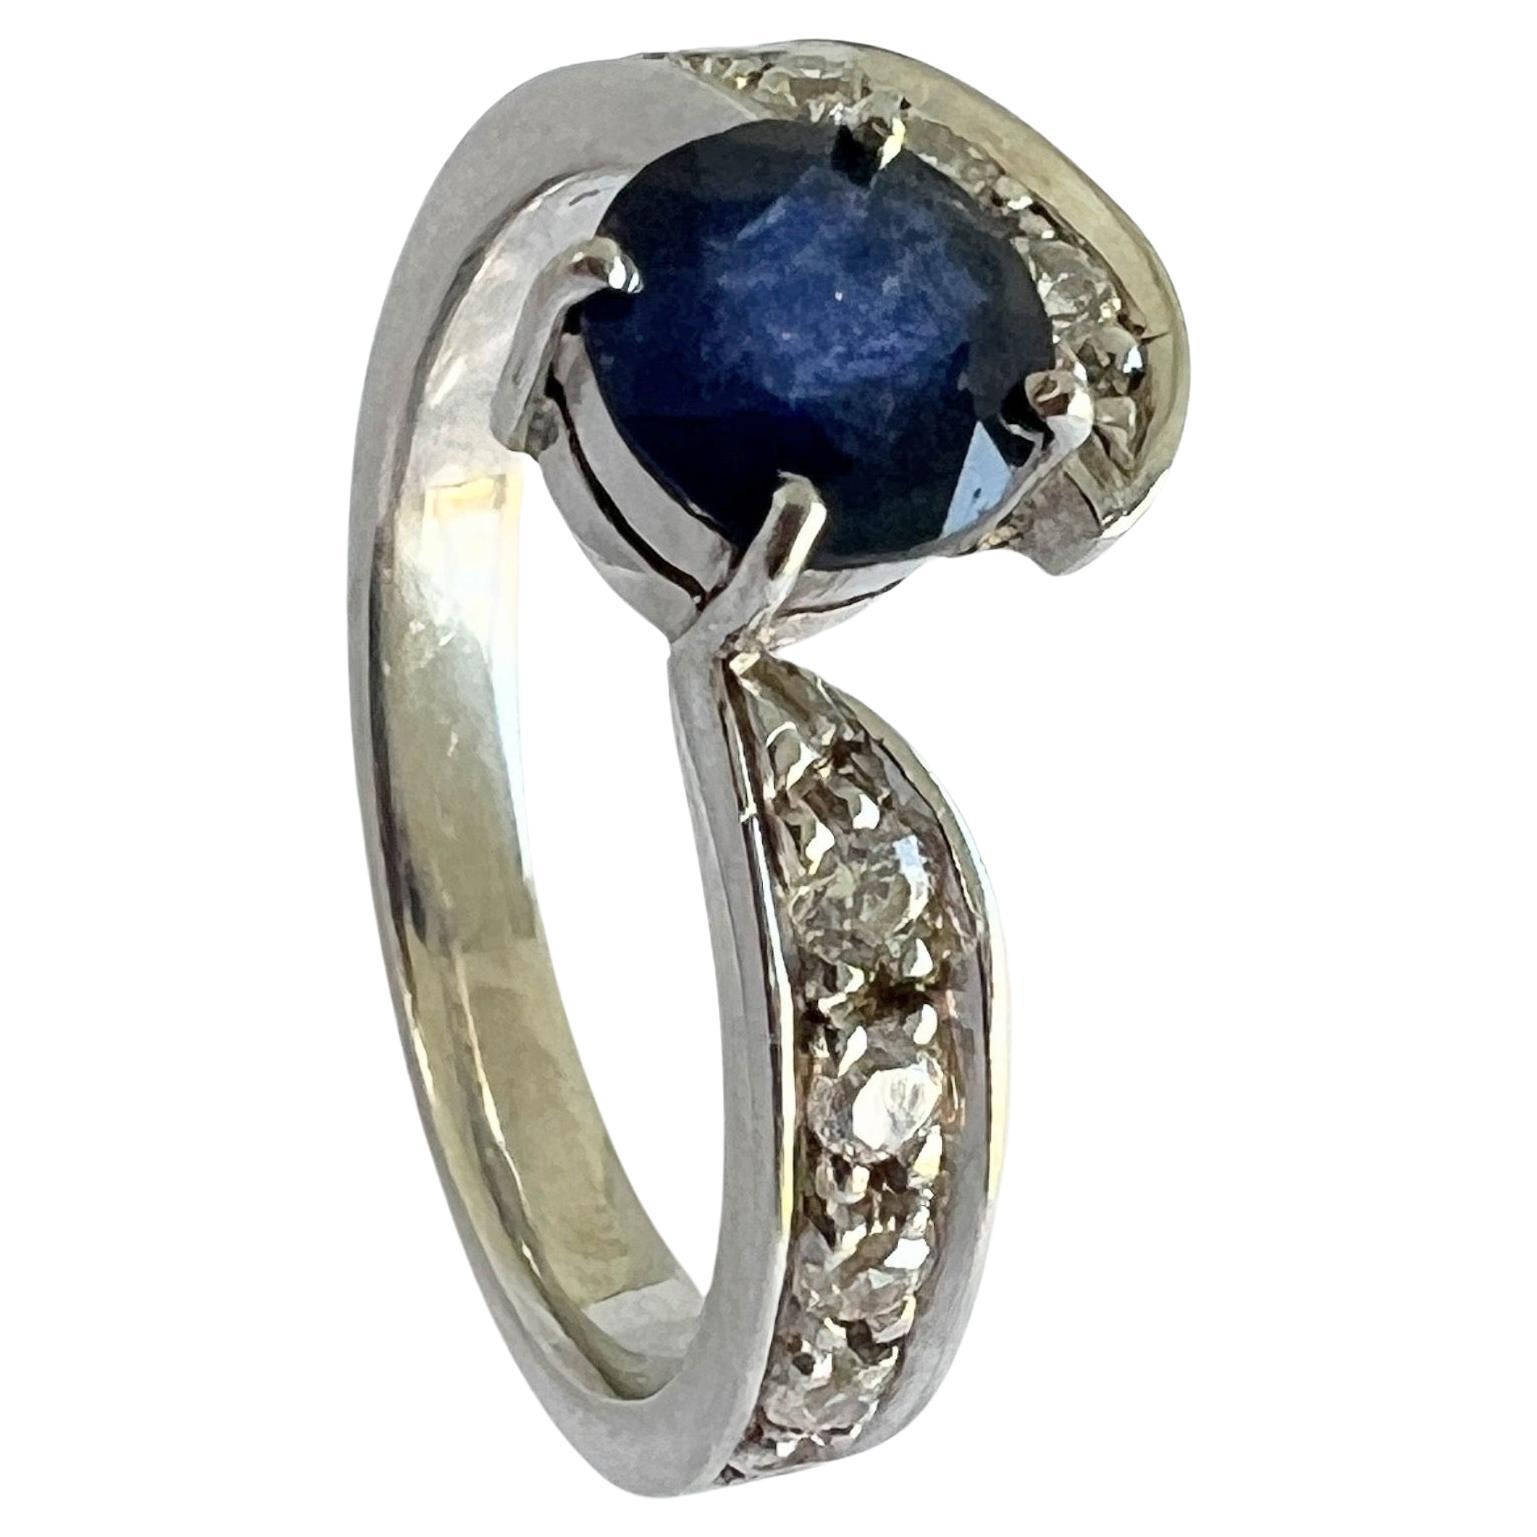 NO RESERVE 1ct BLUE AND WHITE SAPPHIRE Ring